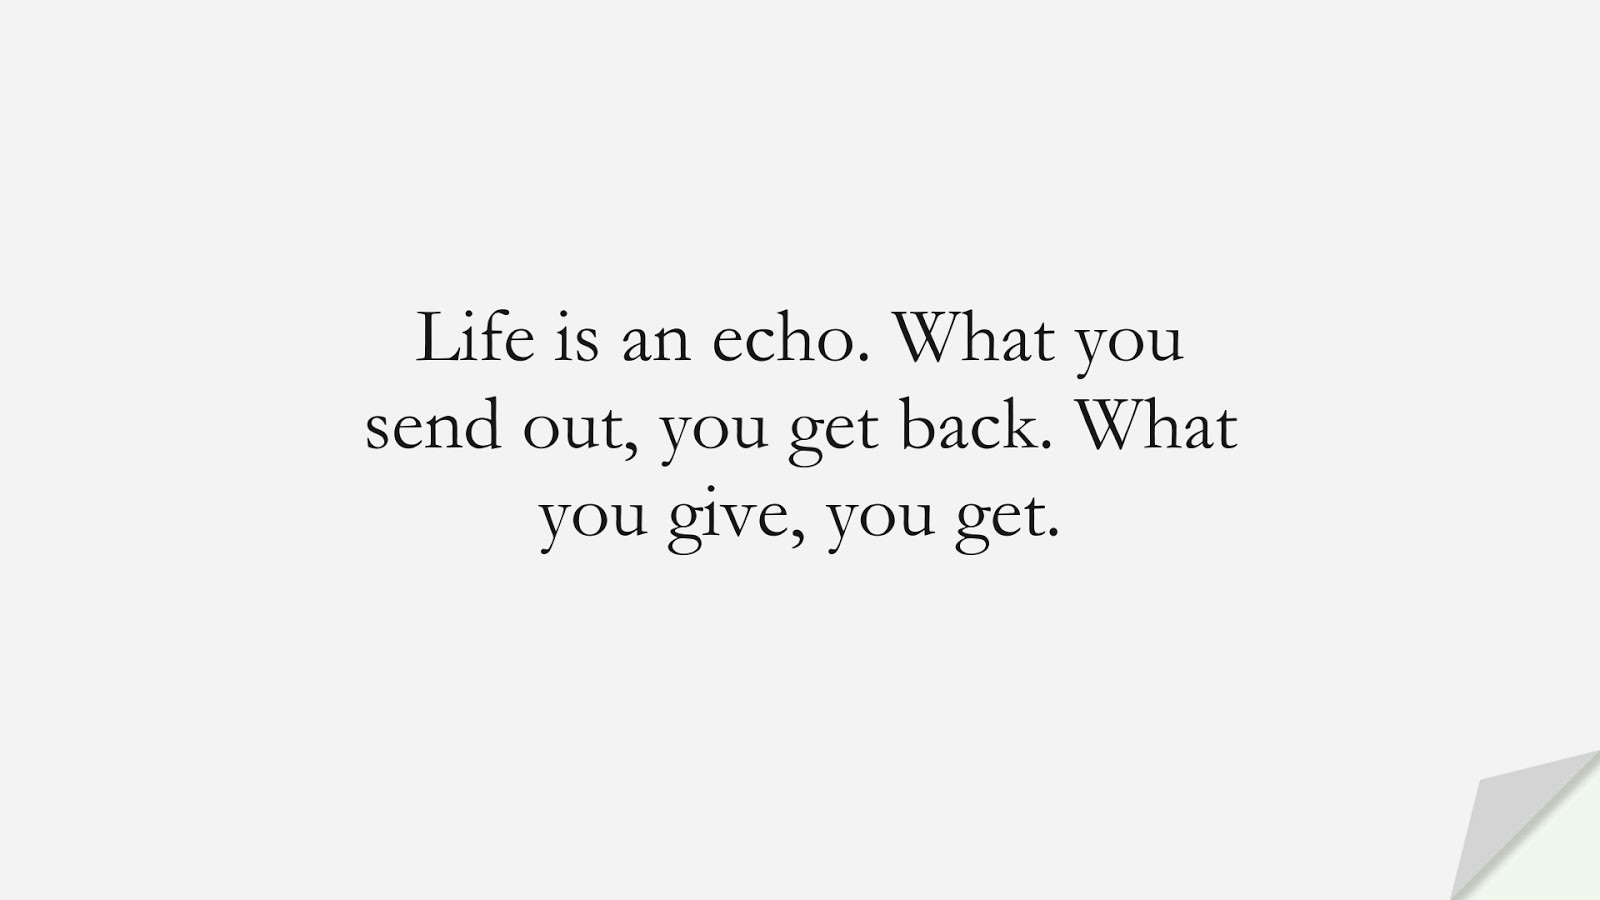 Life is an echo. What you send out, you get back. What you give, you get.FALSE